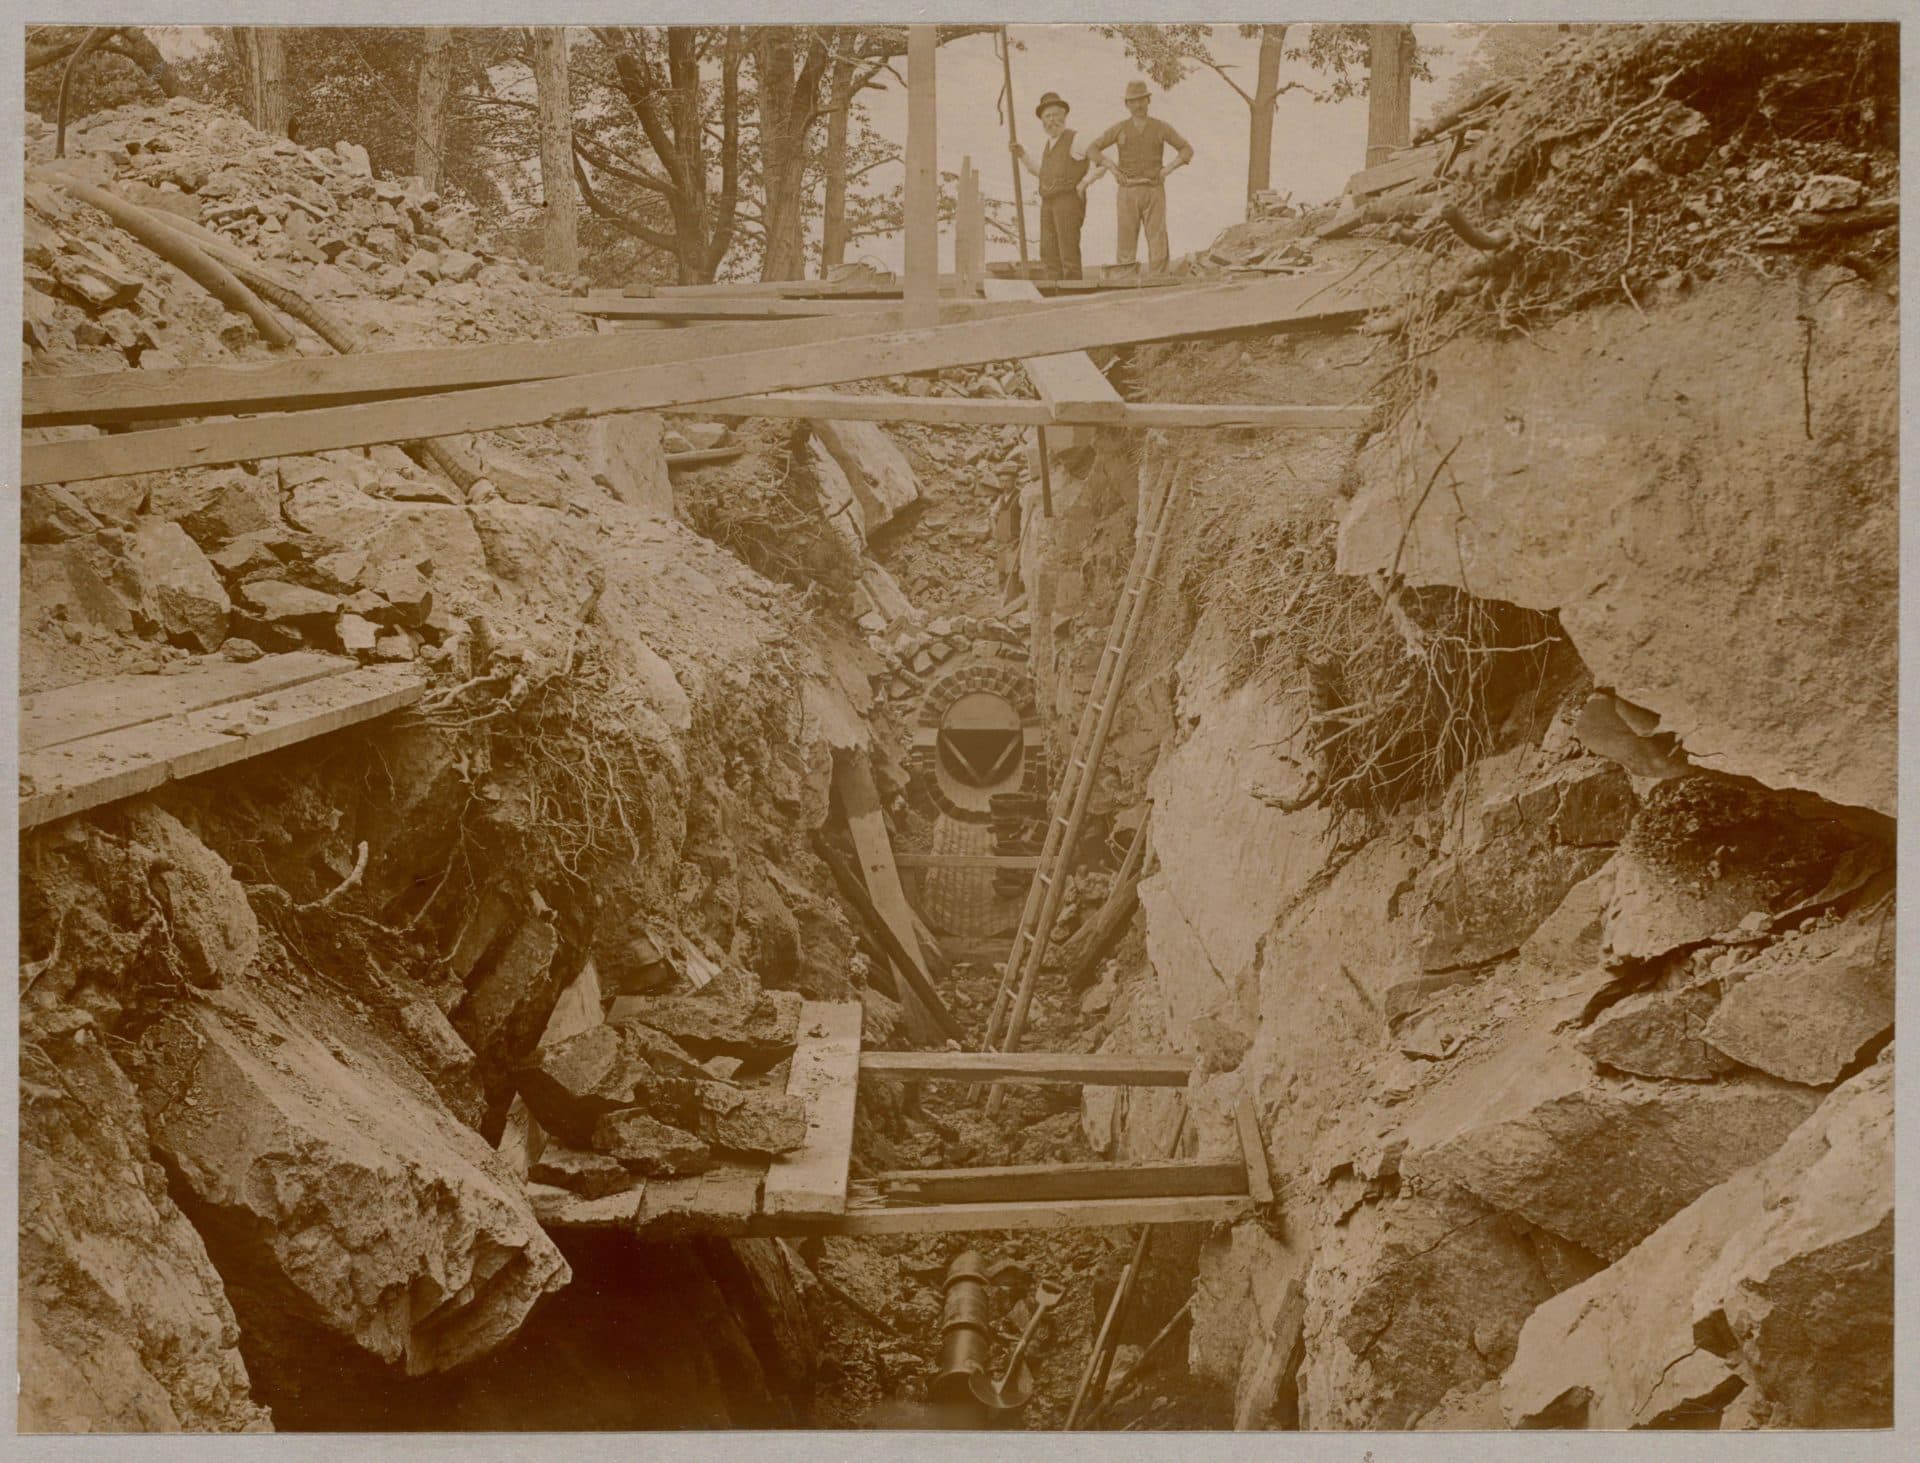 Men stand over unfinished sewer being built in the 1880s (Courtesy Boston Public Library)